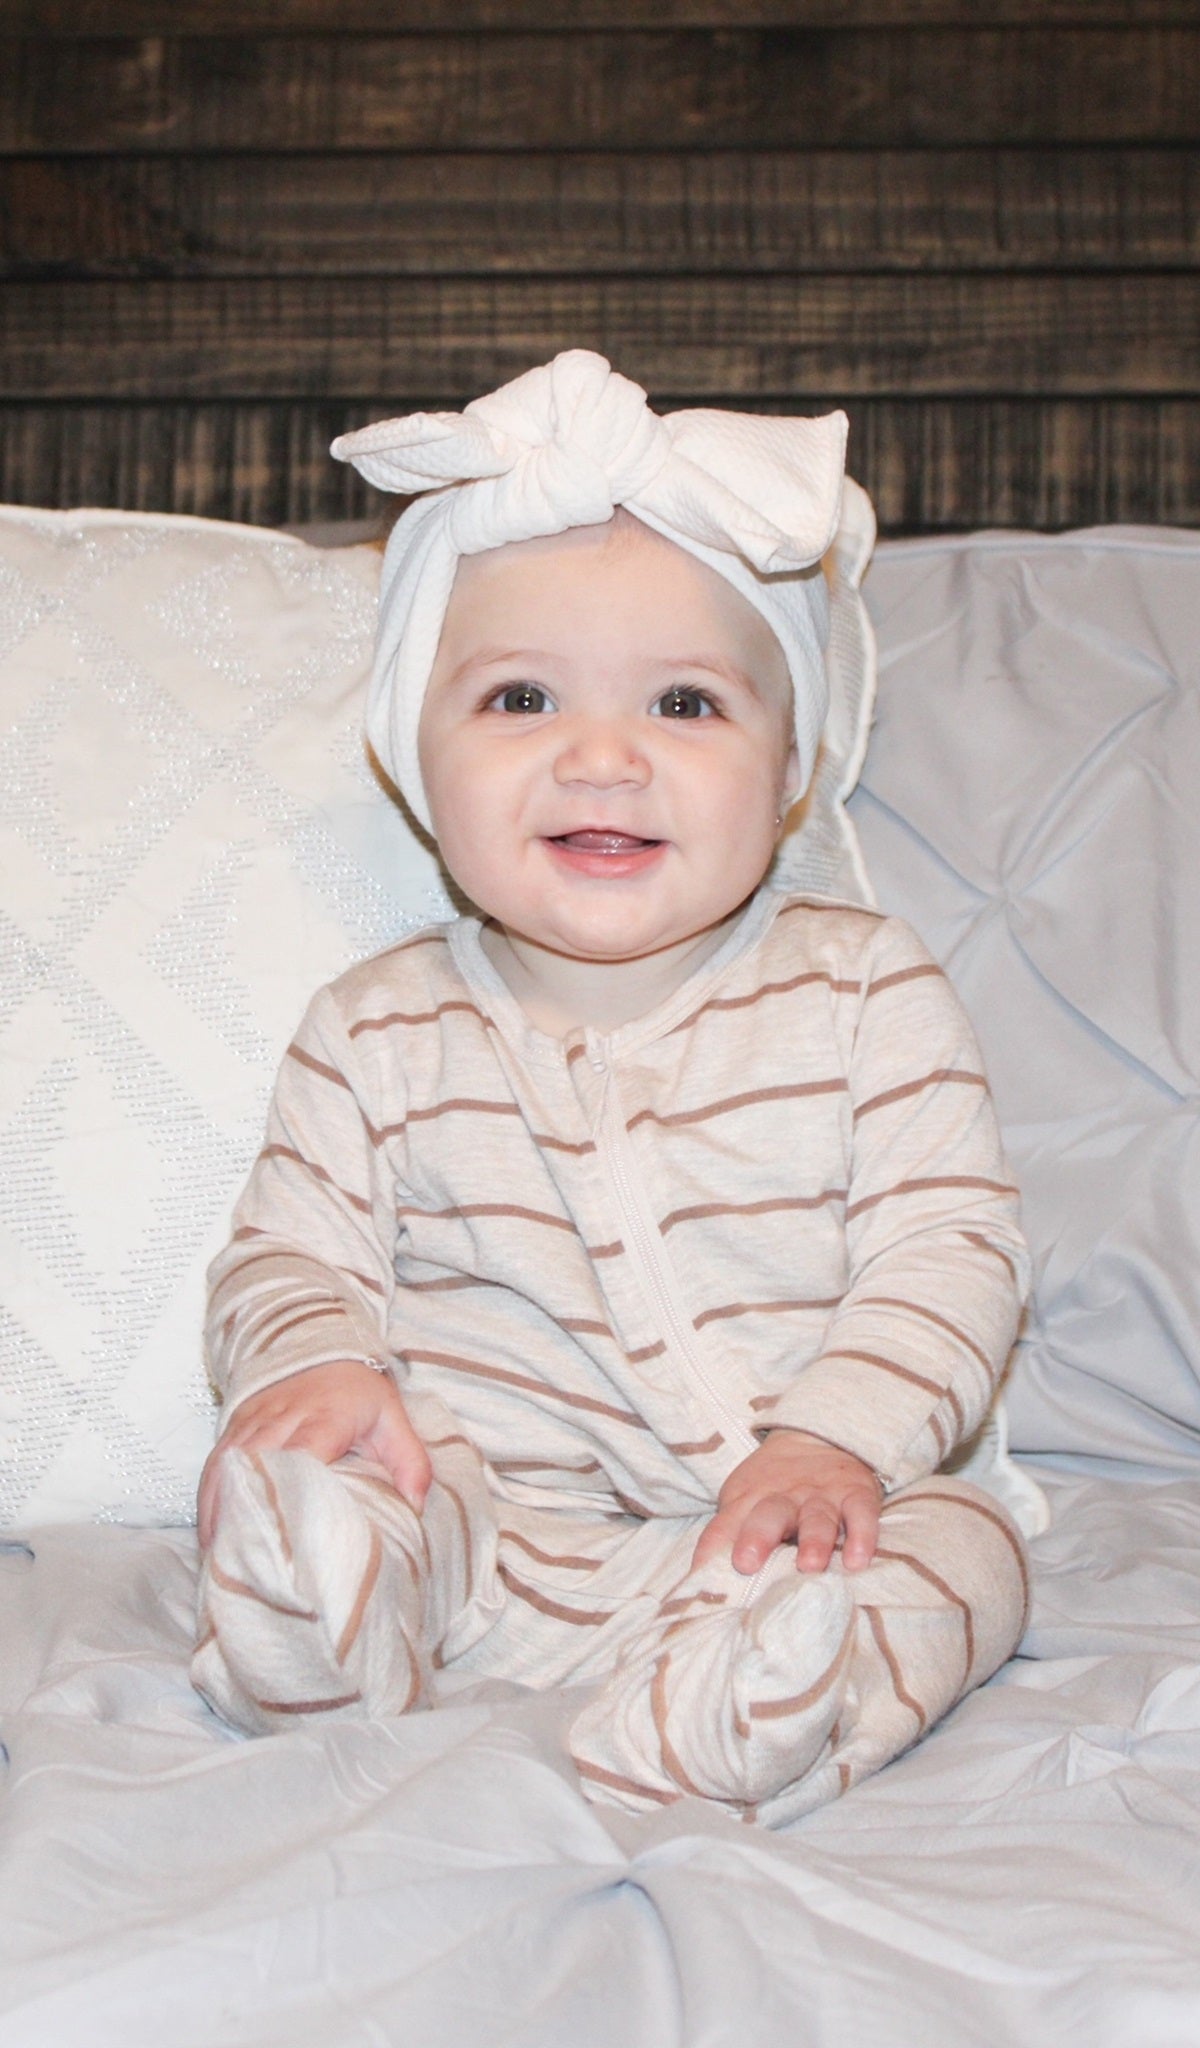 Mocha Stripe Footie worn by baby with bow on her head.